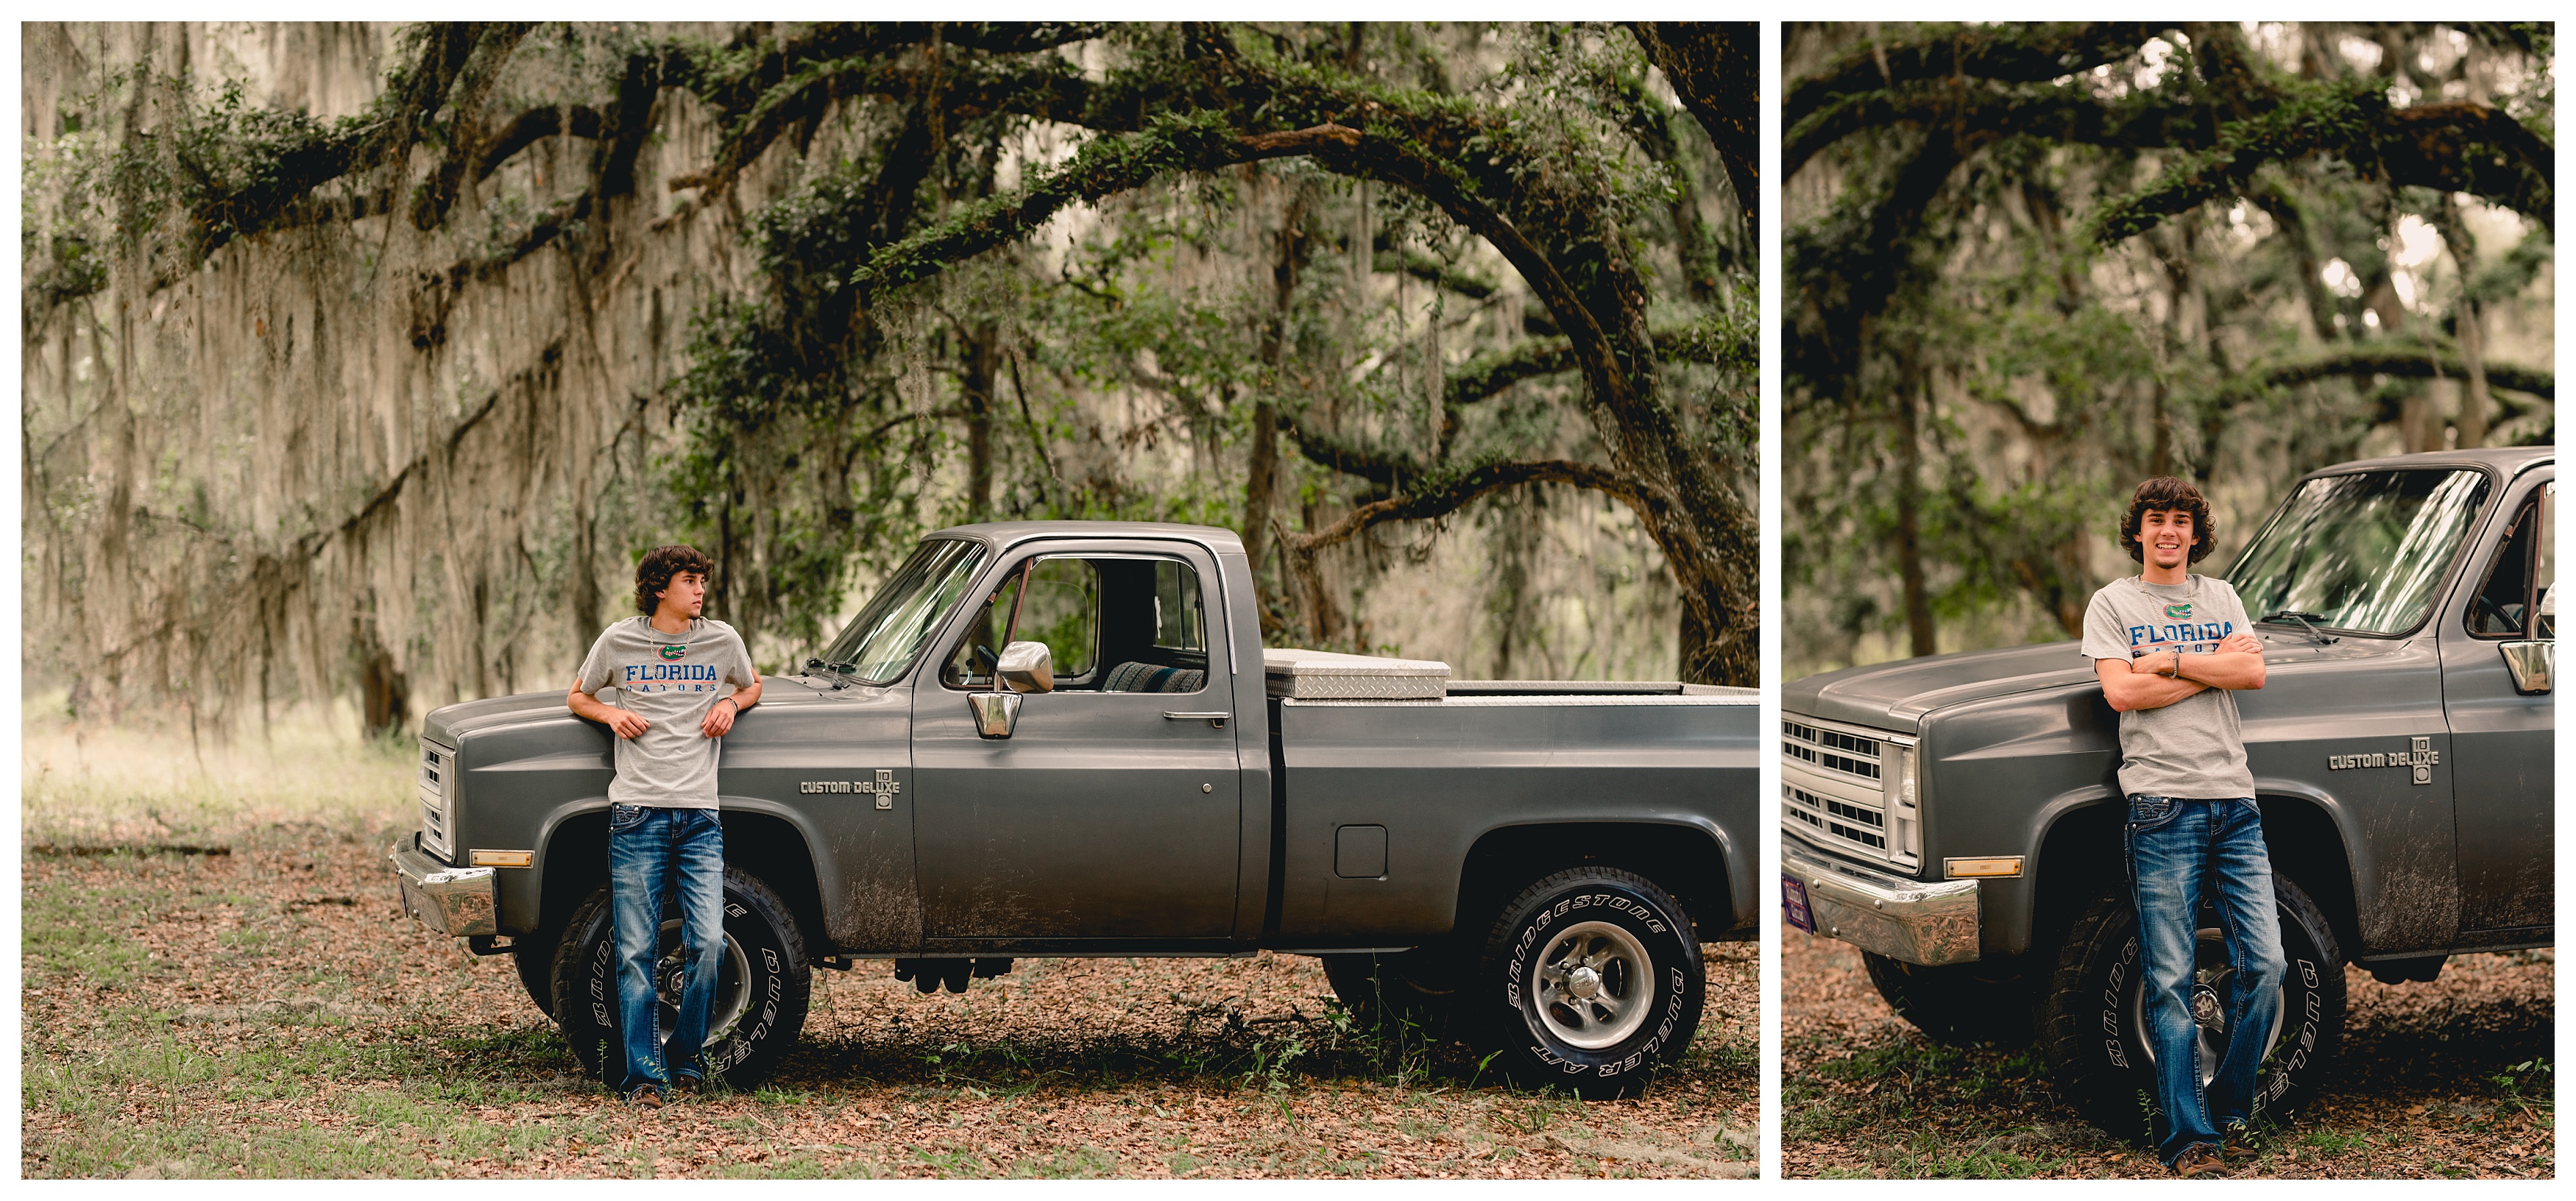 Guy senior pics for last year in high school. Guy leaned up against a truck. 